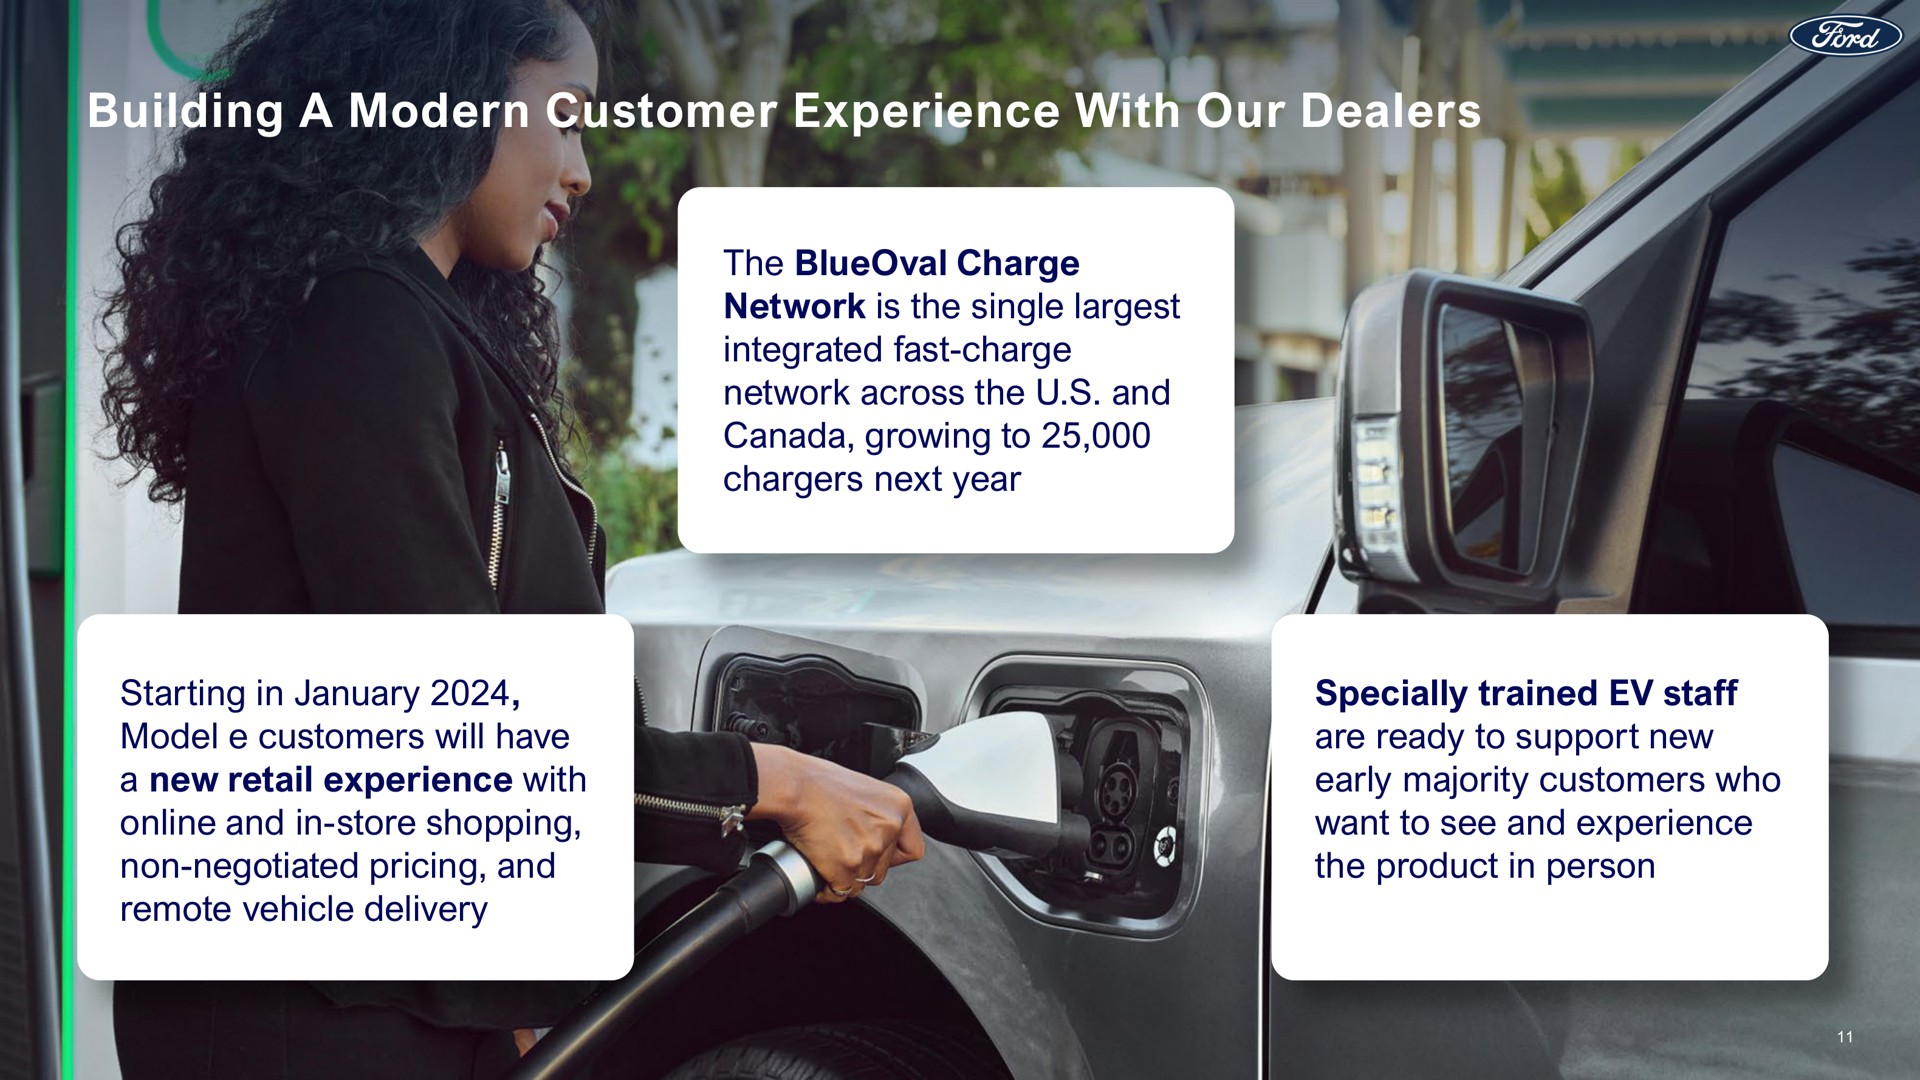 building a modern customer experience with our dealers the charge network is the single integrated fast charge network across the and canada growing to chargers next year starting in model customers will have a new retail experience with and in store shopping non negotiated pricing and remote vehicle delivery specially trained staff are ready to support new early majority customers who want to see and experience the product in person eat | Ford